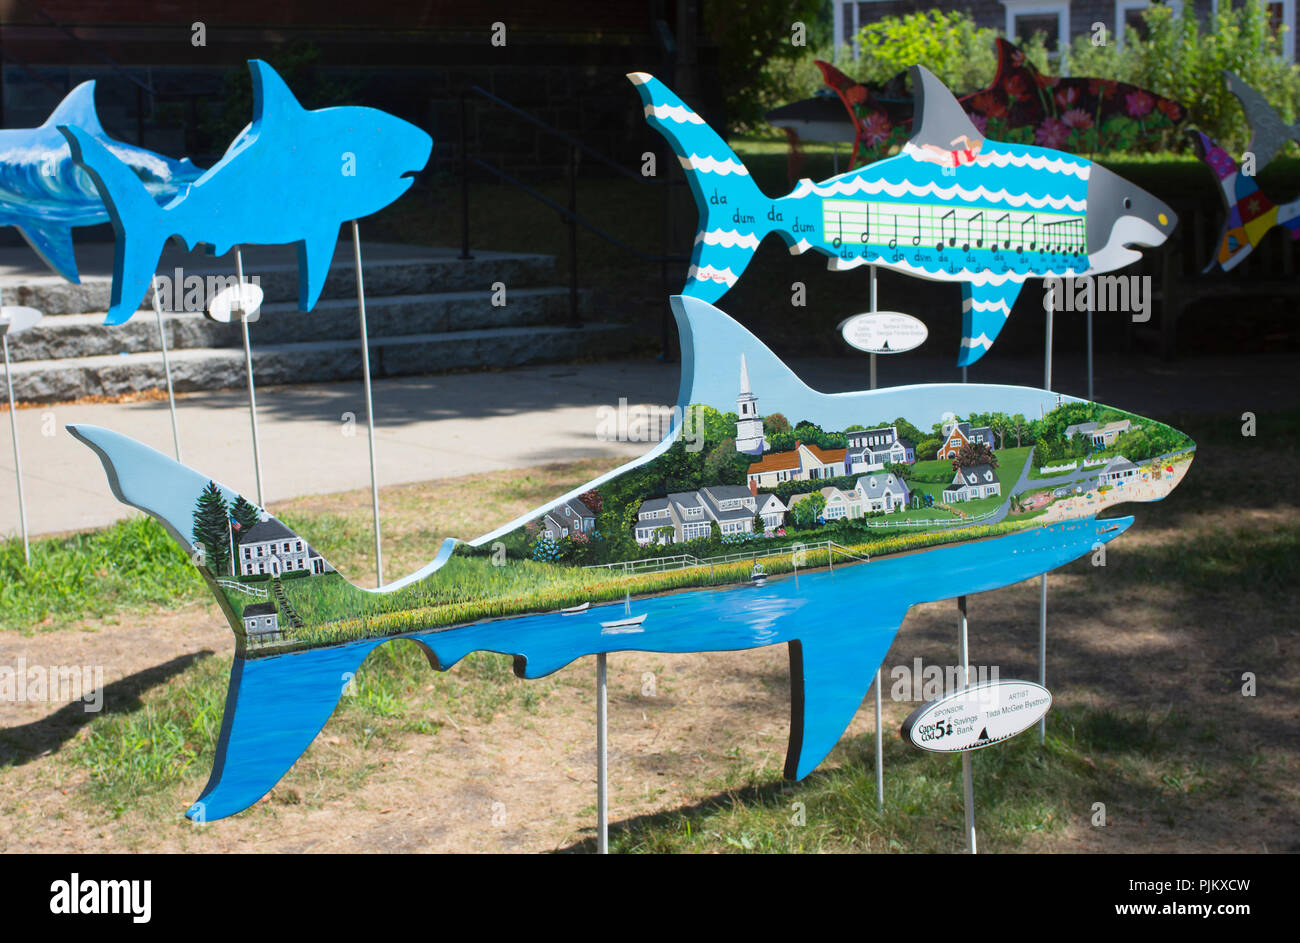 Artists renderings of sharks on display in Chatham, Massachusetts on Cape Cod, USA Stock Photo